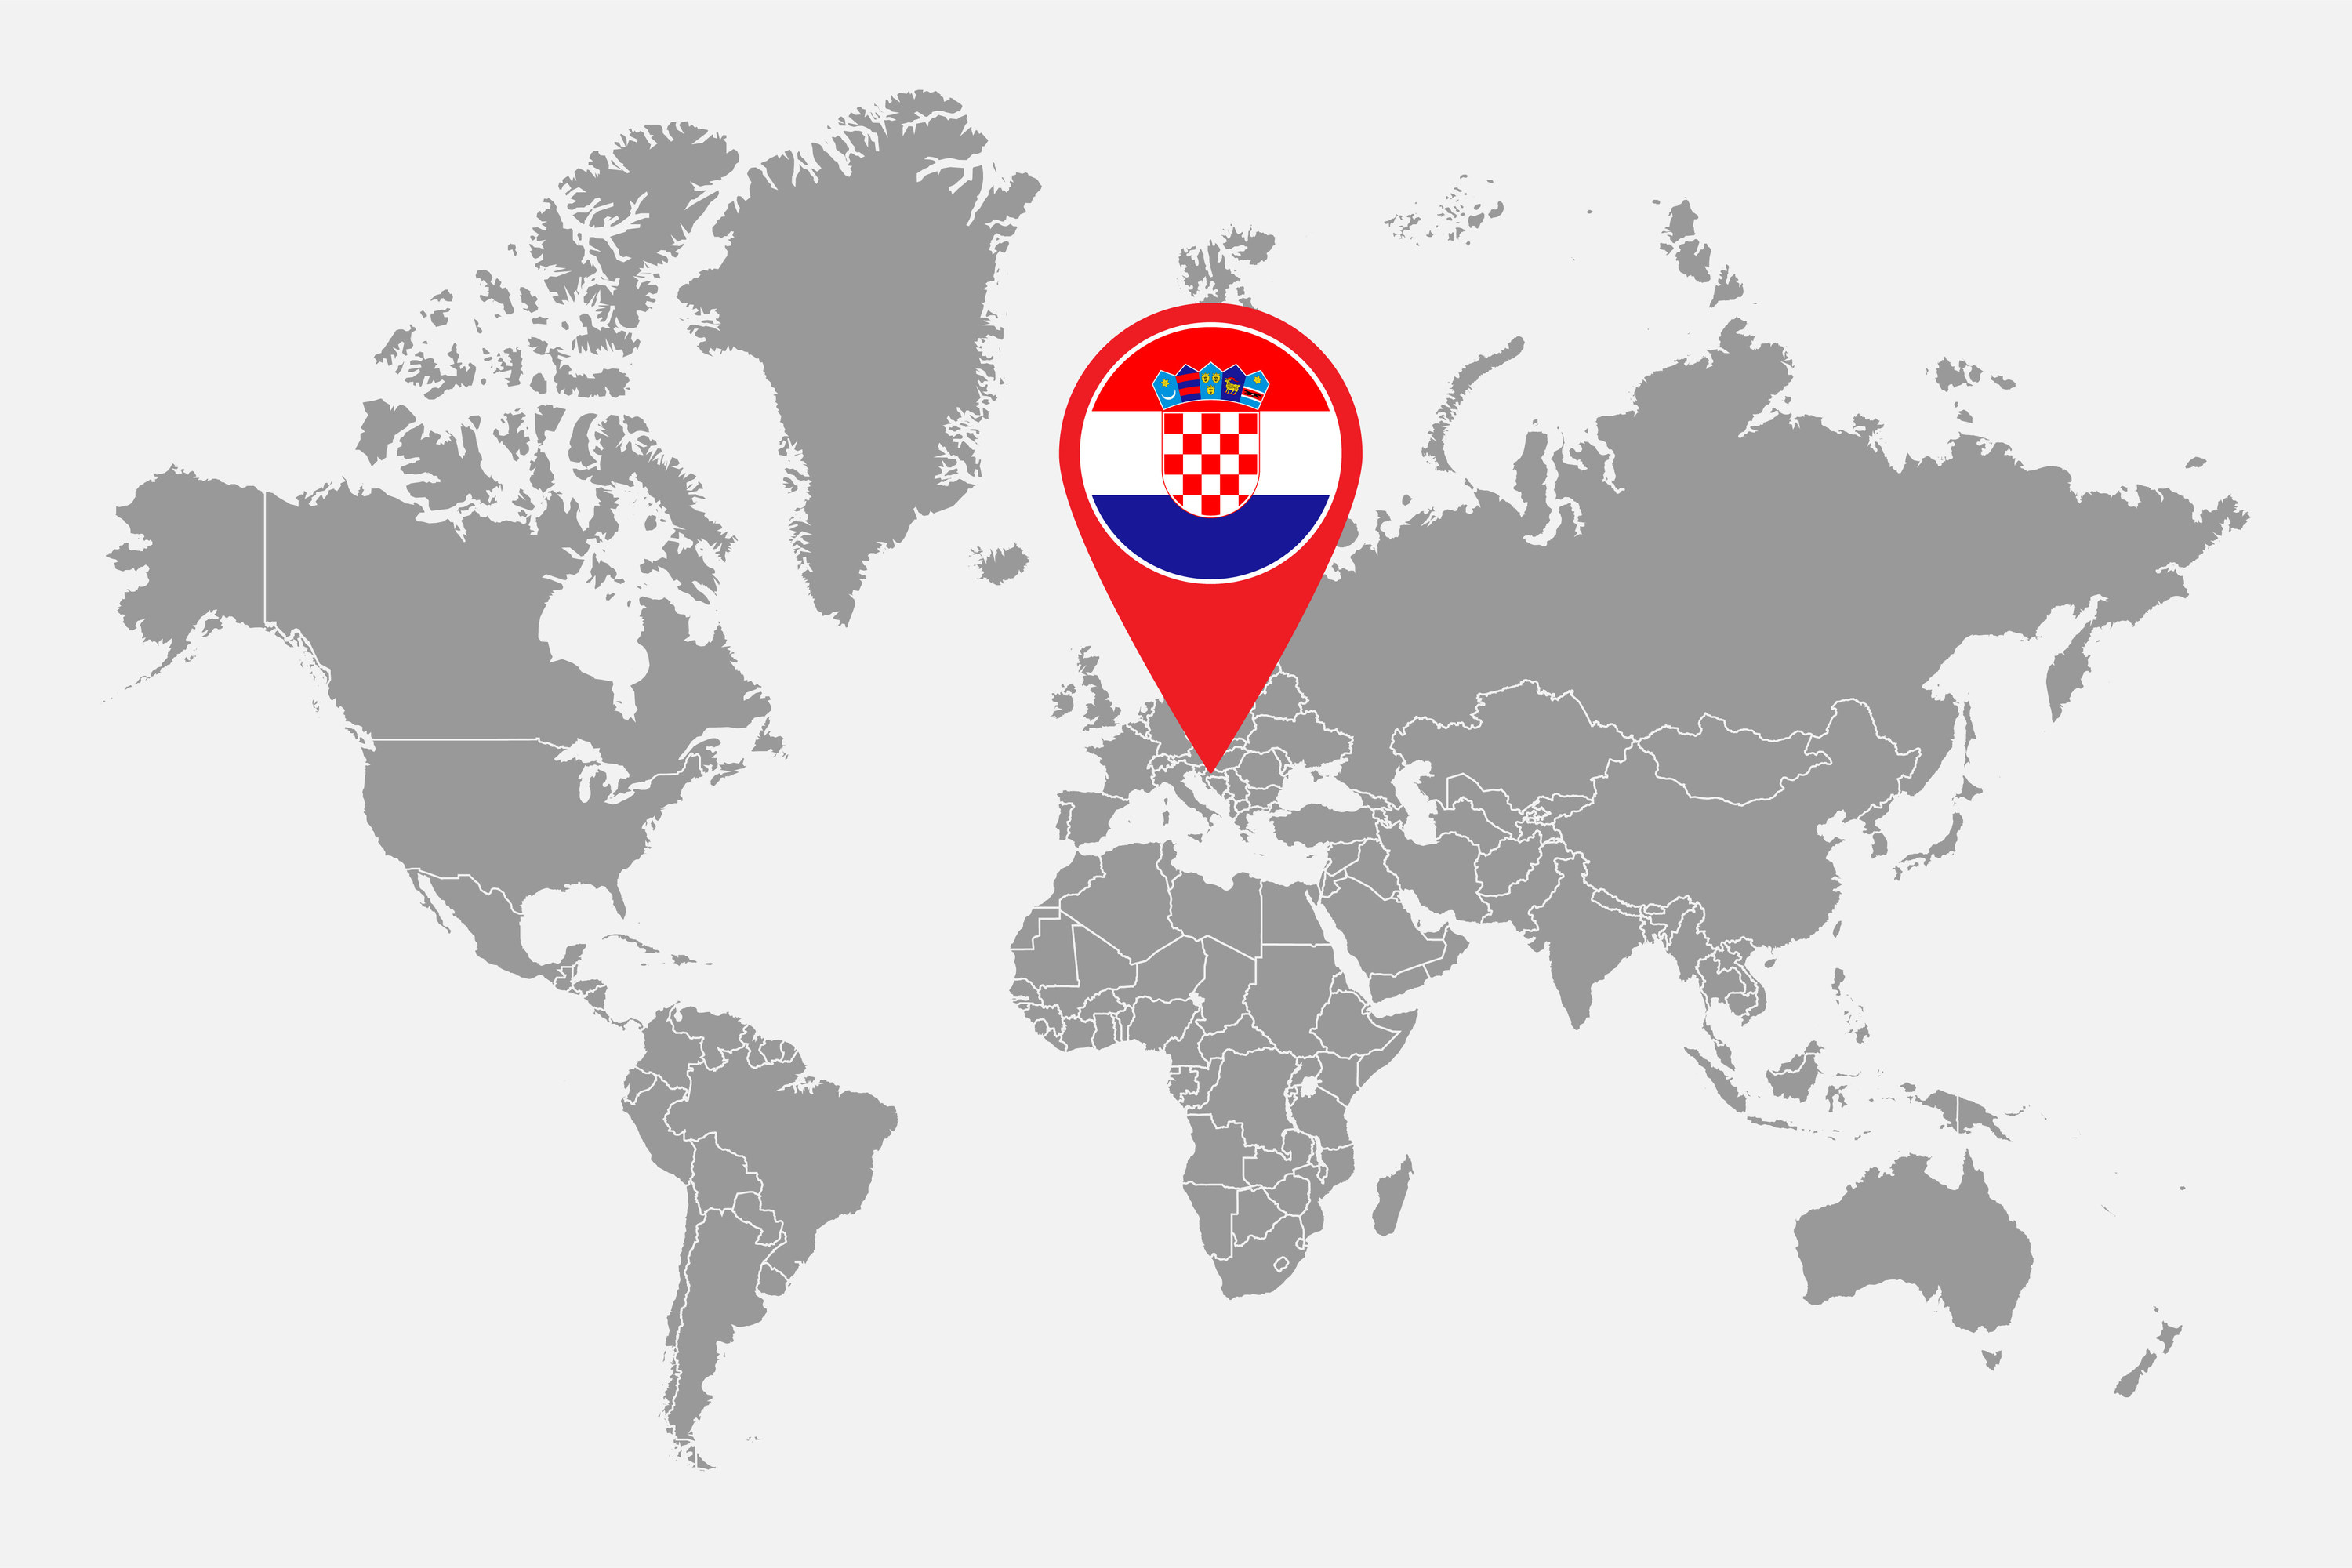 A world map with Croatia indicated